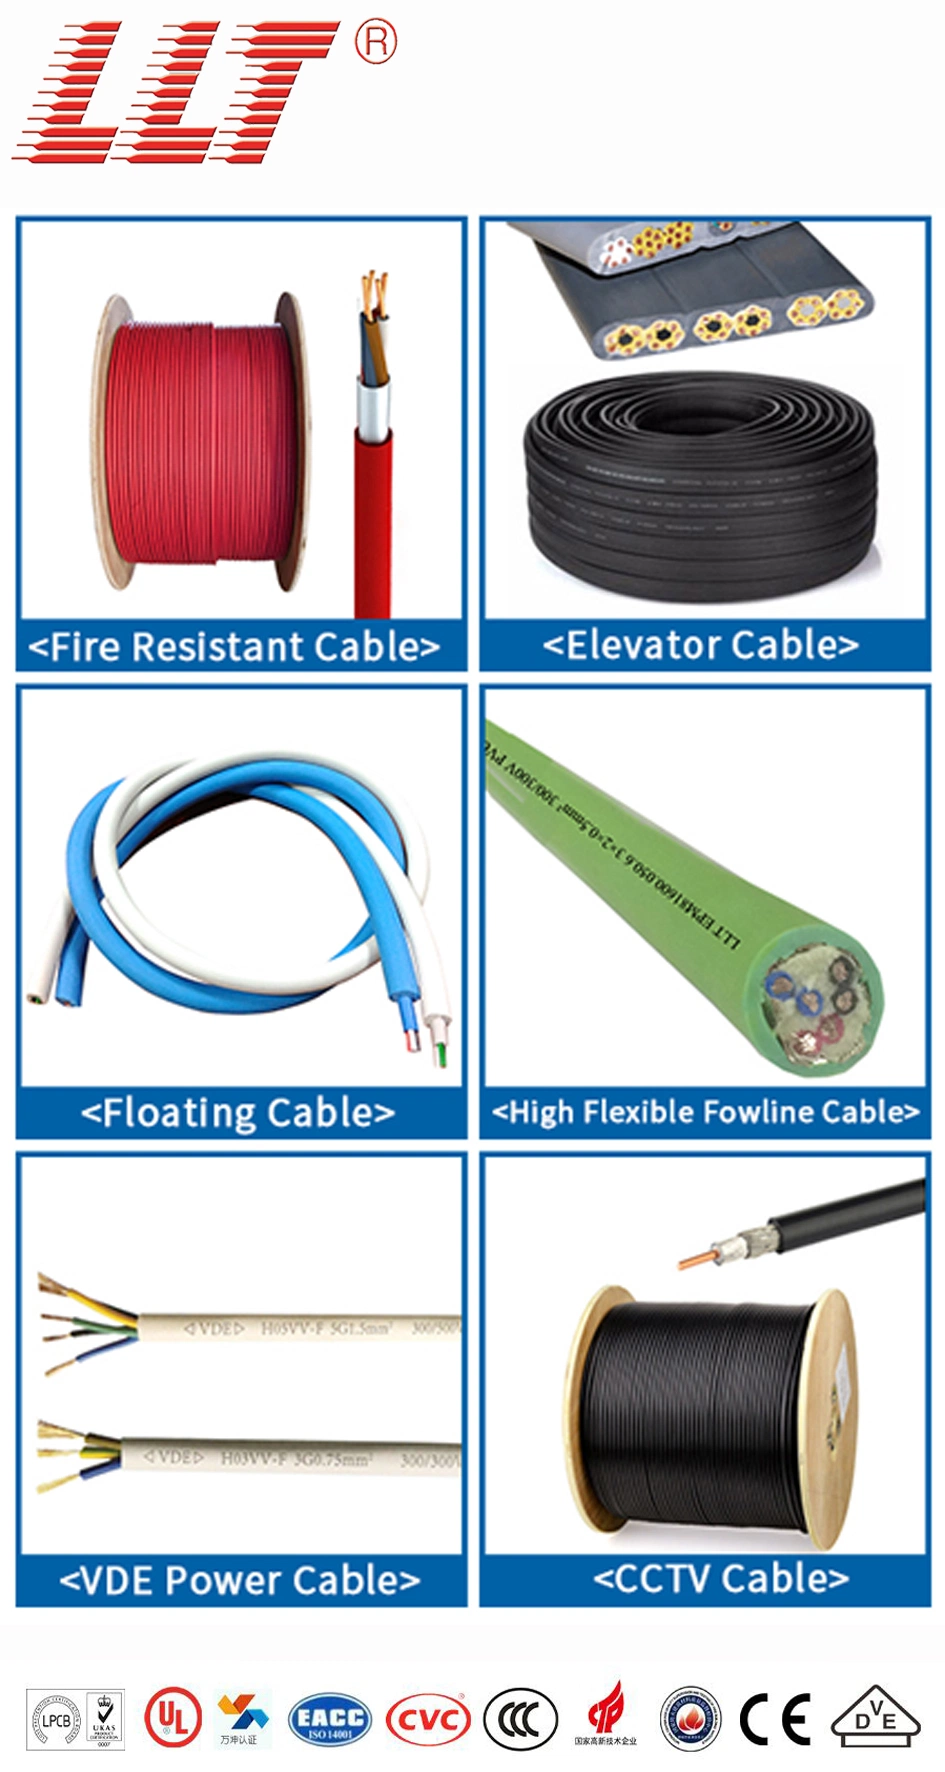 High Flame Retardant 120 Minutes Performance Fire Resistant Cable 3c 1.5mm